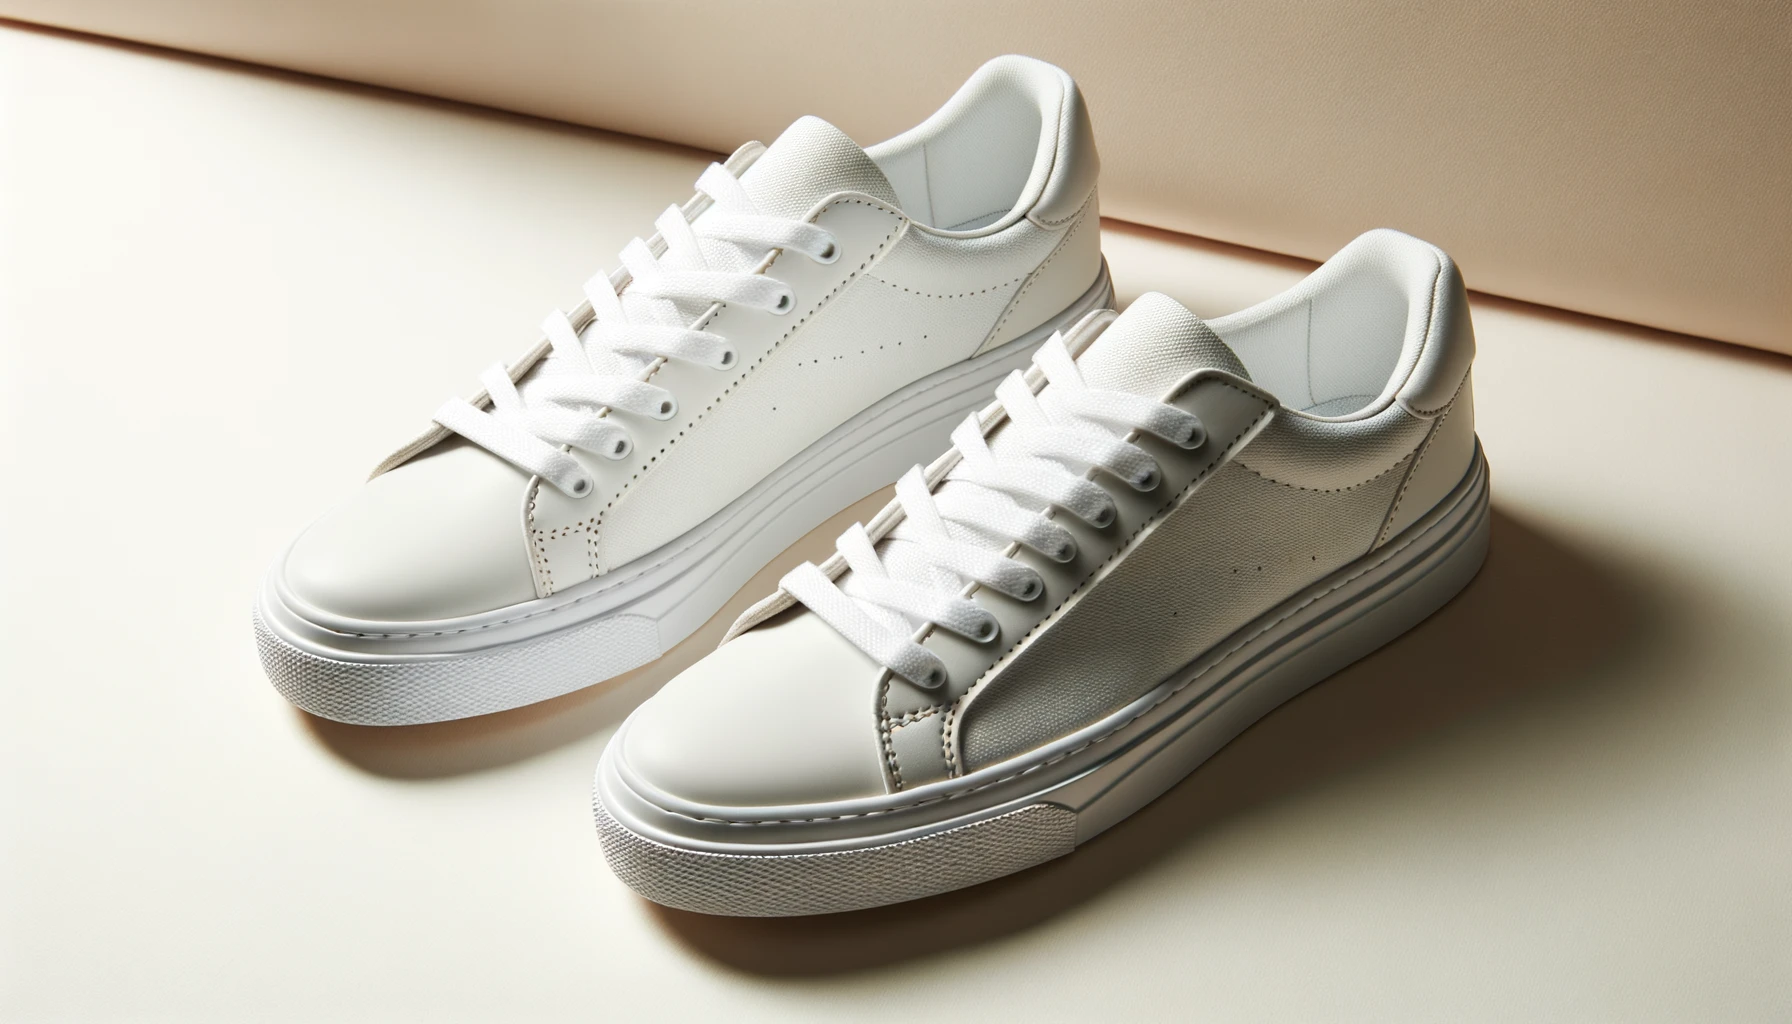 Shop White Sneakers: A Trend That Never Fades